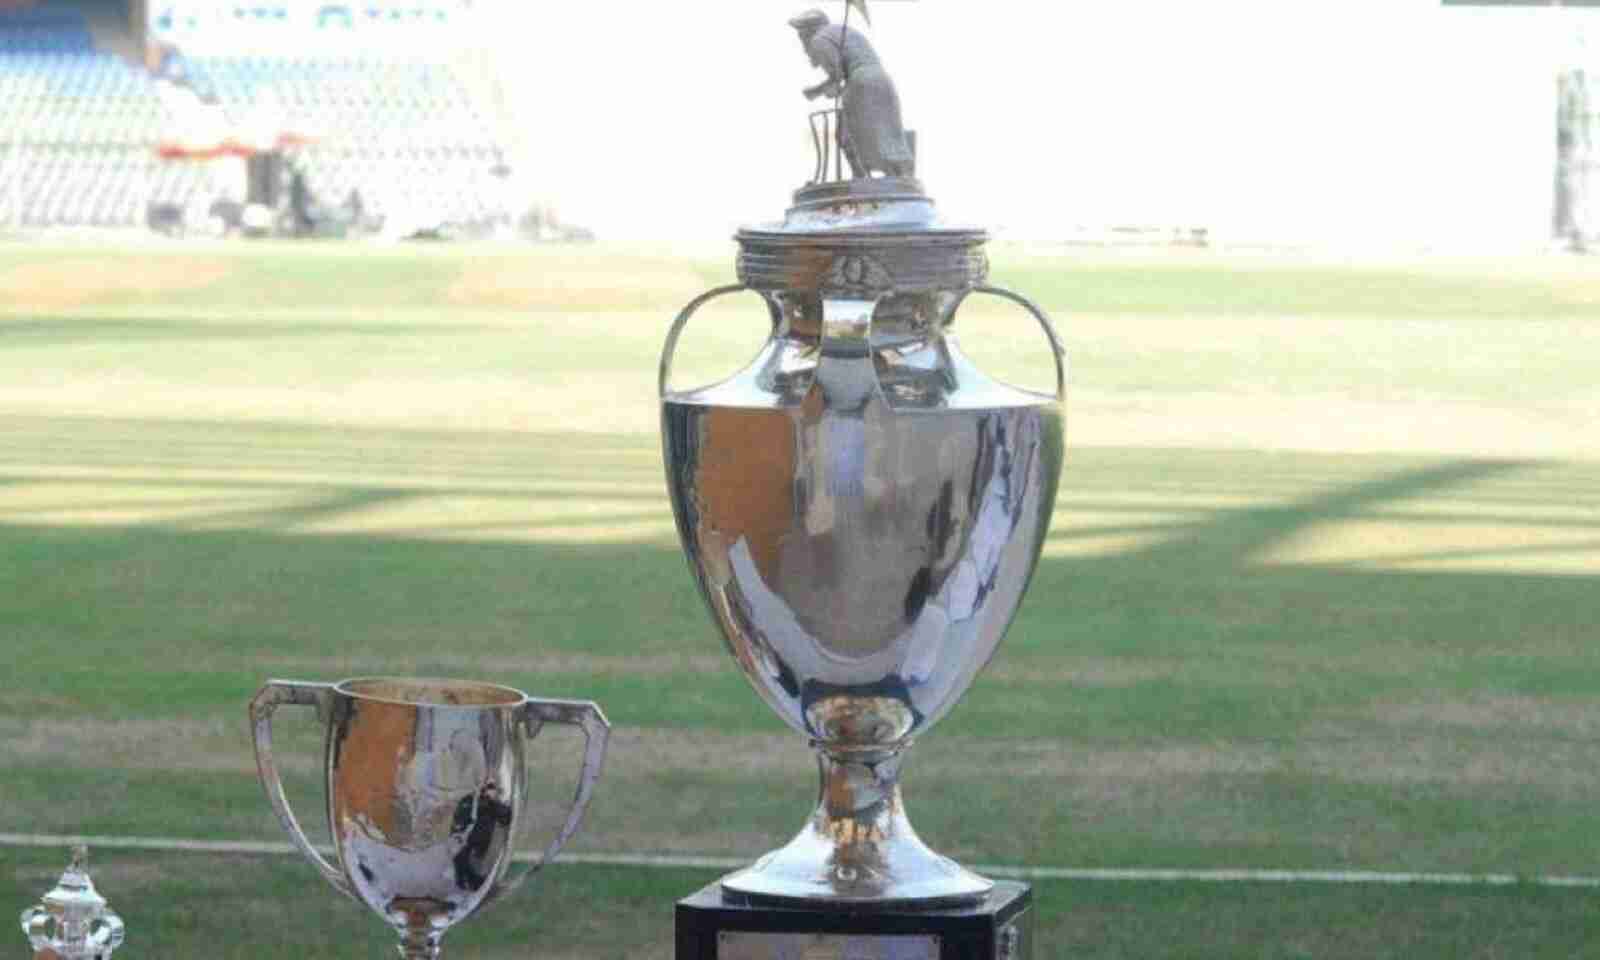 Ranji Trophy, is all set to return after a gap of two years